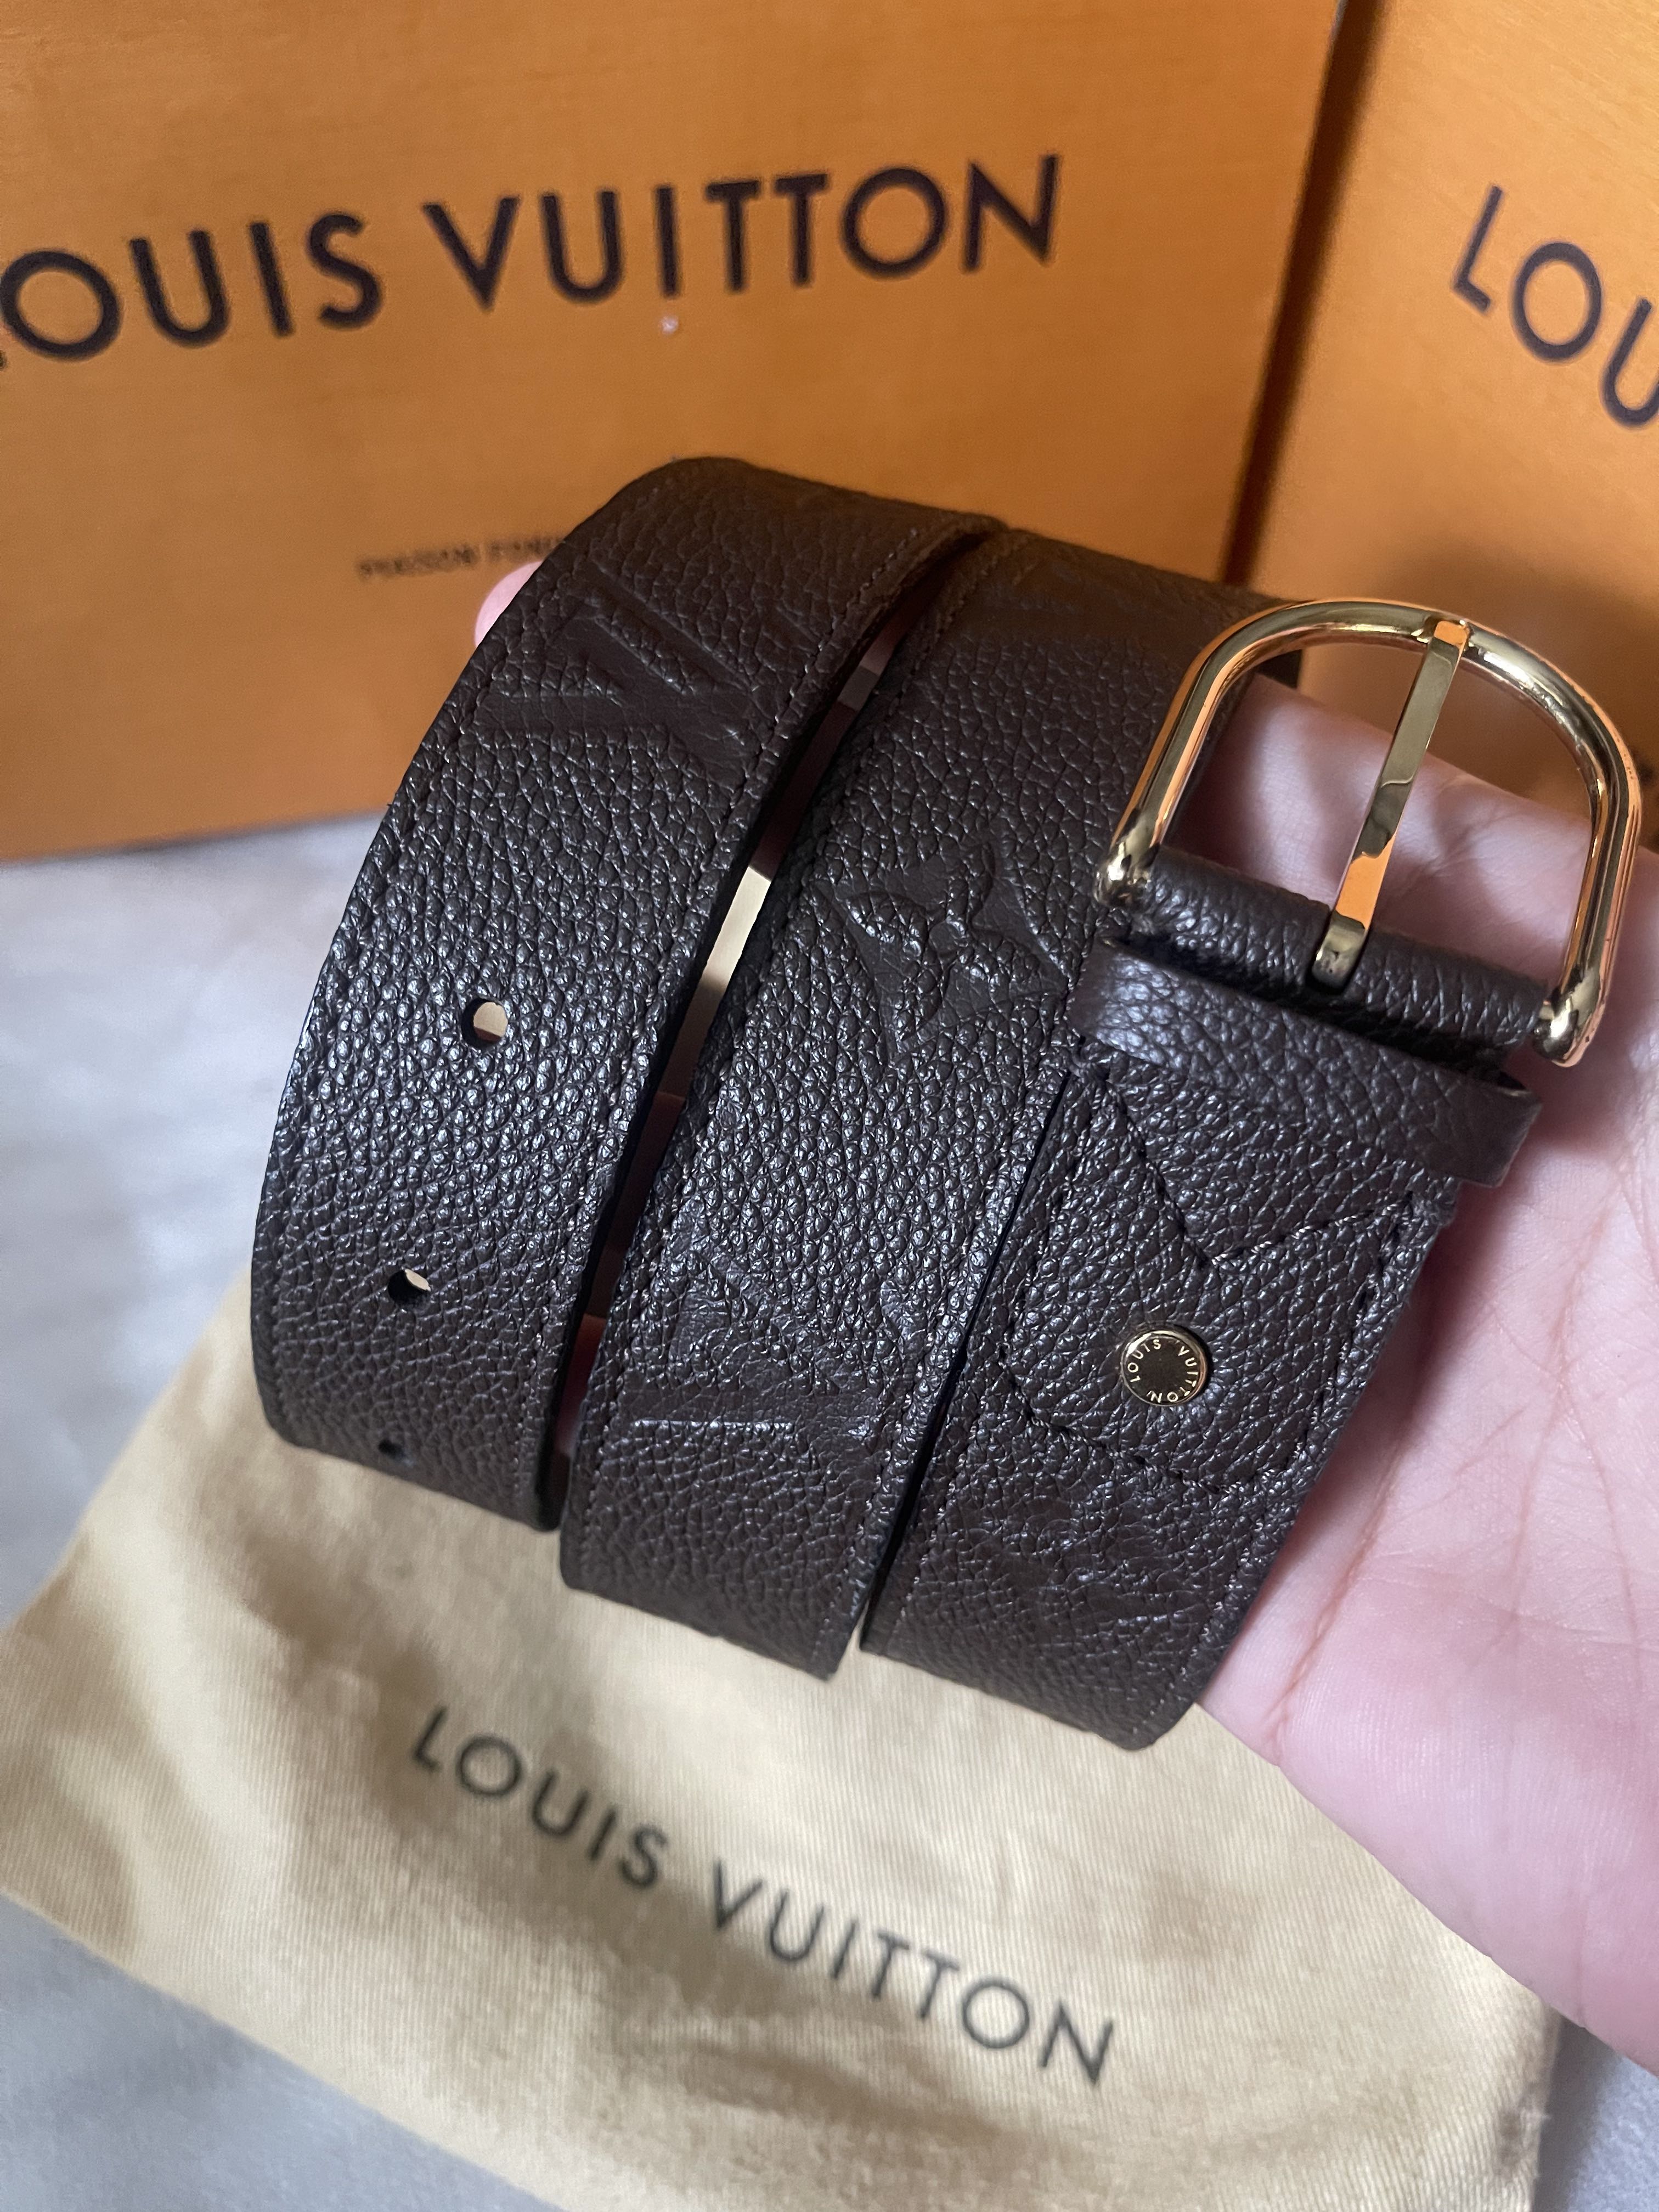 Louis Vuitton Gold Leather Mahina Perforated Belt Size 90 CM Louis